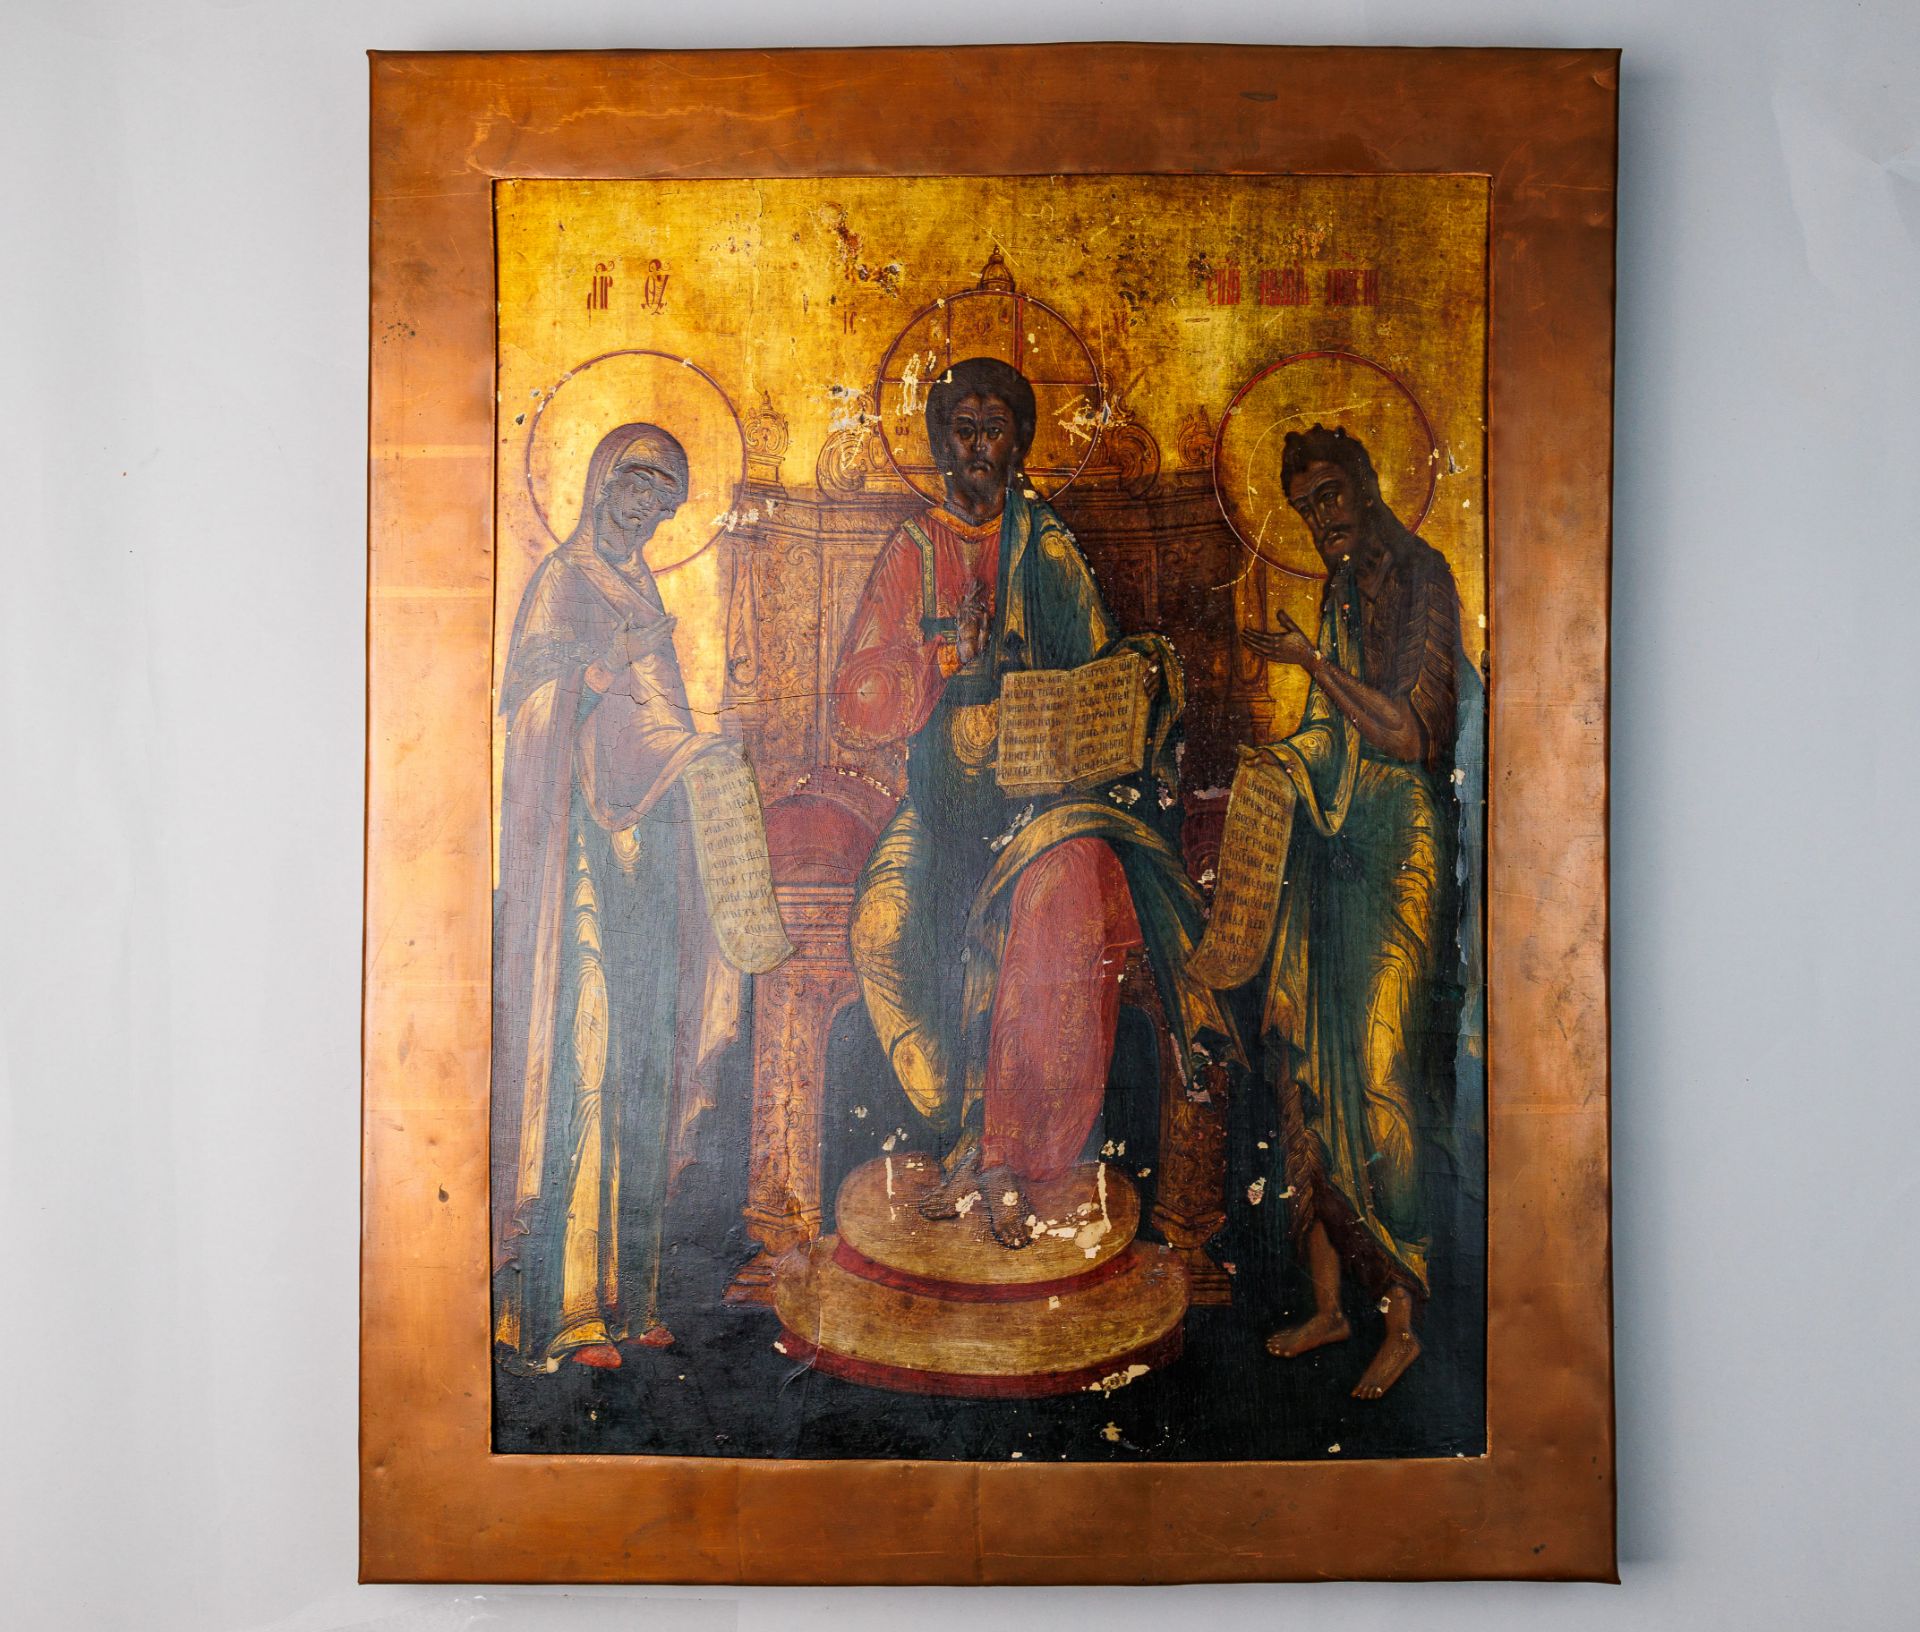 Icon "The Lord Almighty is on the throne with those present. The Virgin Mary and John the Baptist"